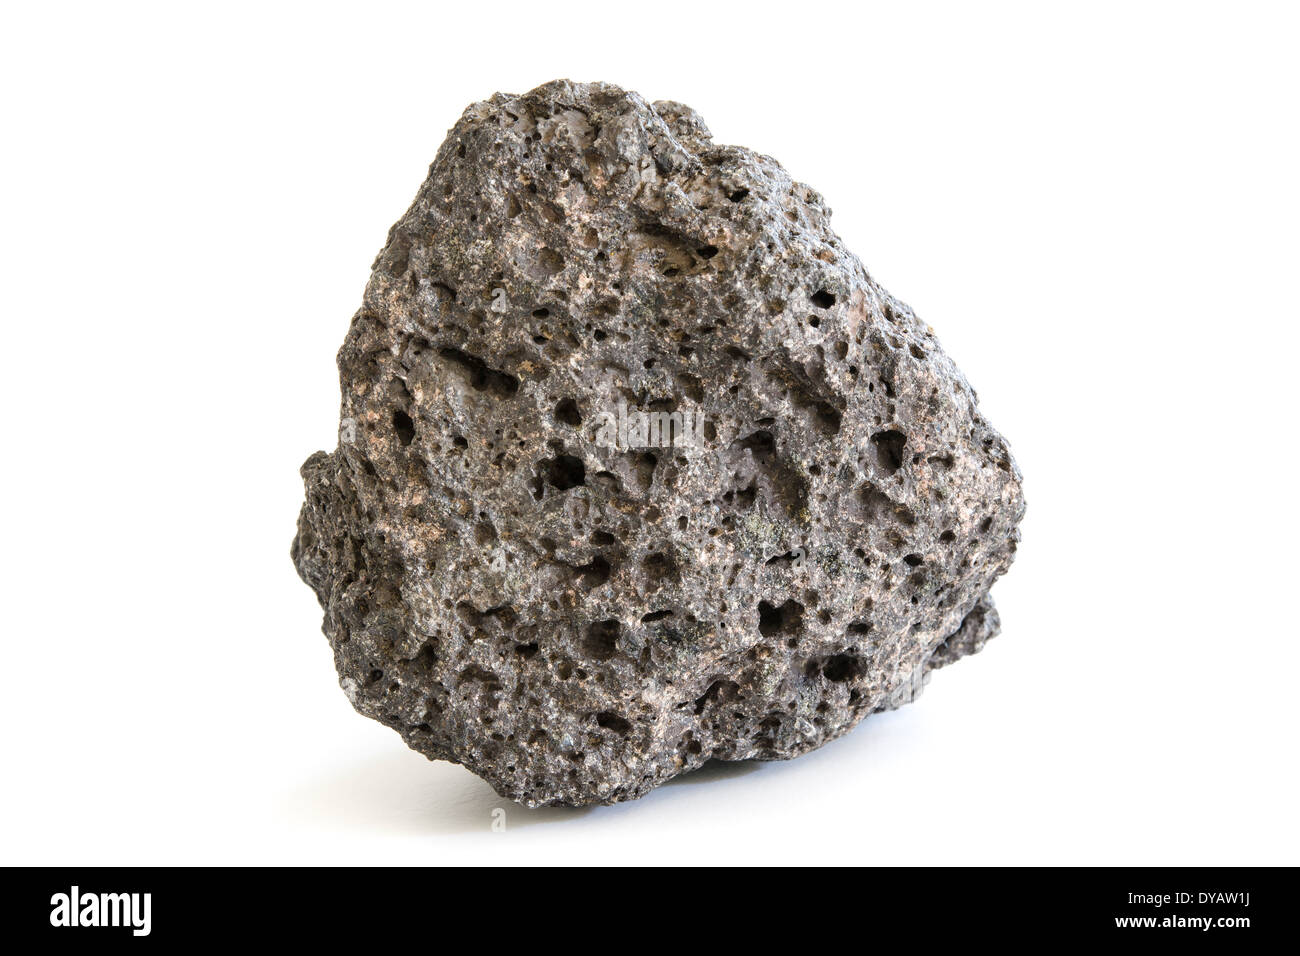 Piece of volcanic extrusive igneous rock with abrasive porous surface isolated on white Stock Photo